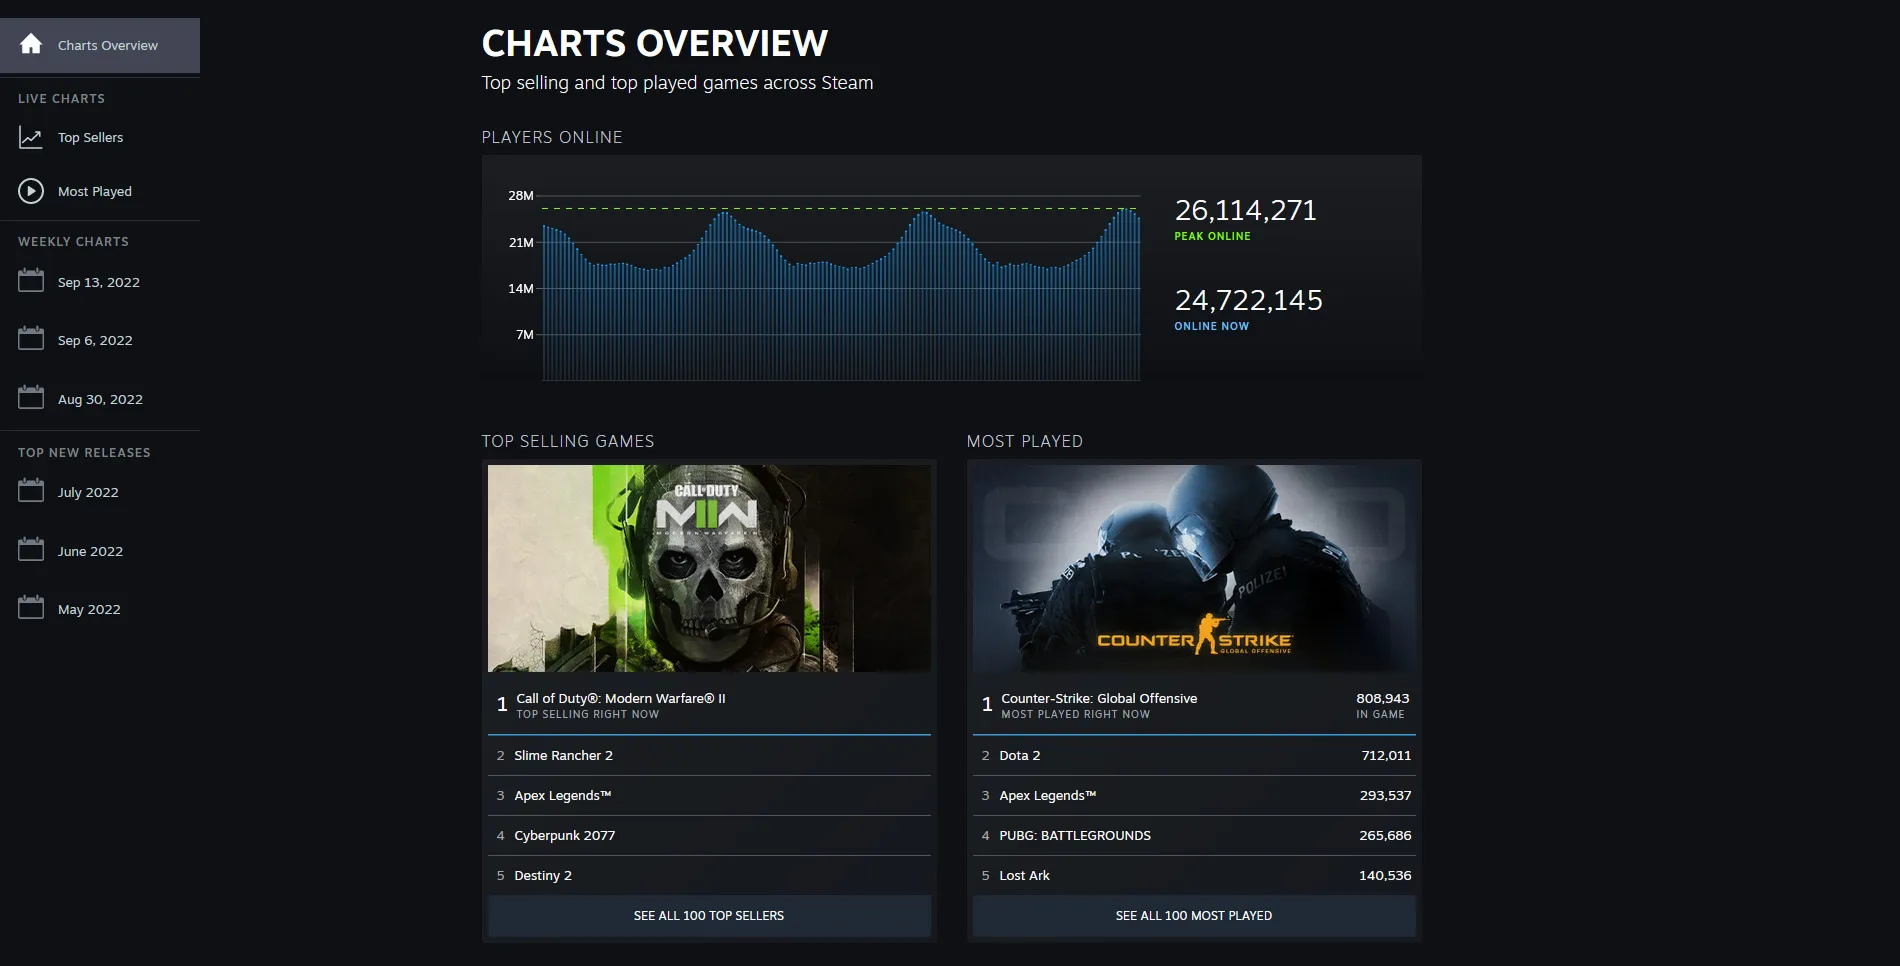 Steam most played games by peak player number 2022